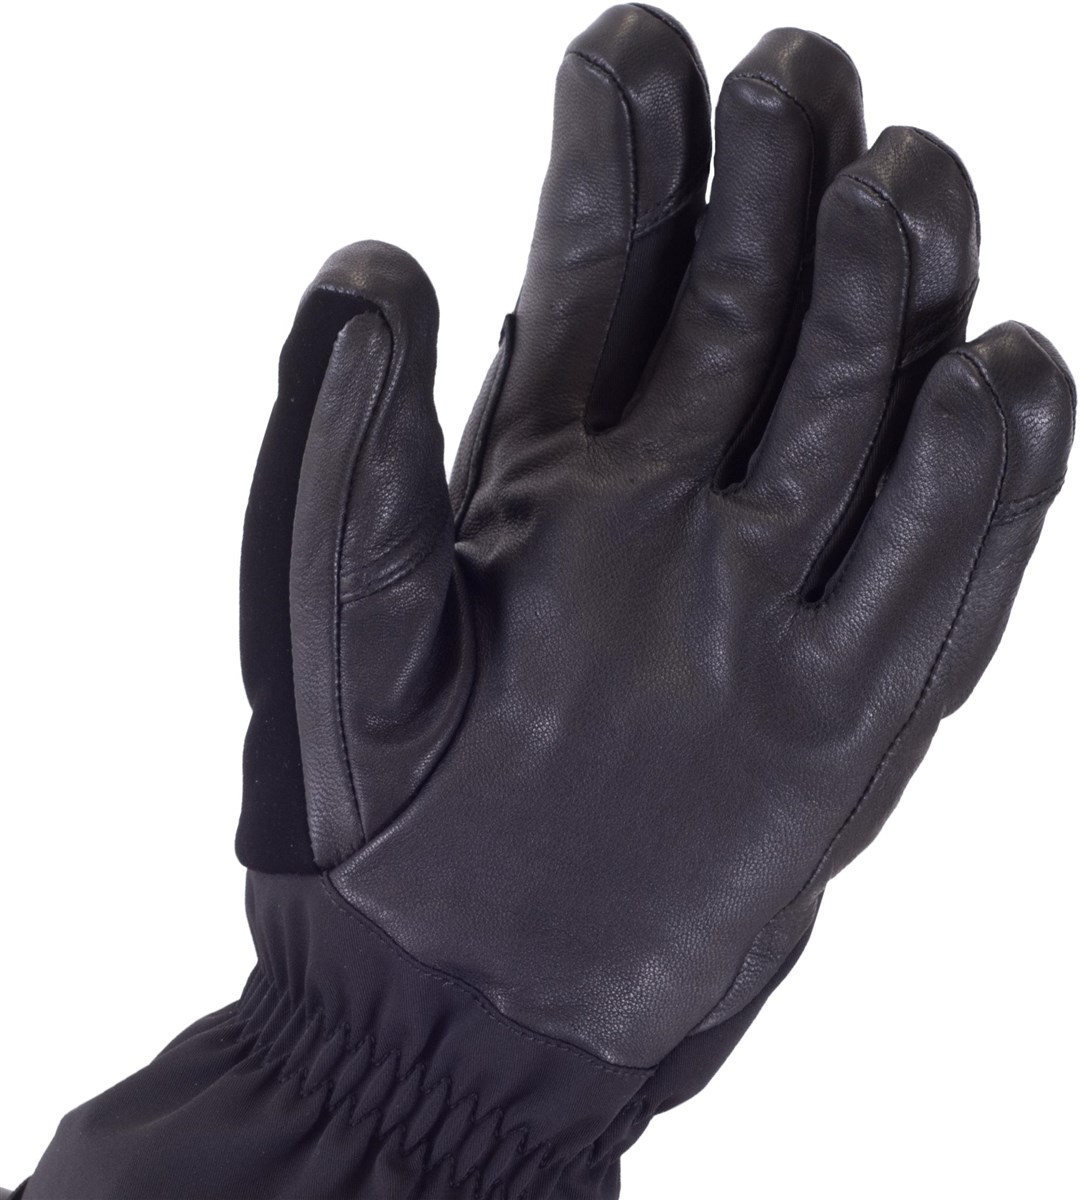 SealSkinz Extreme Cold Weather Long Finger Cycling Gloves